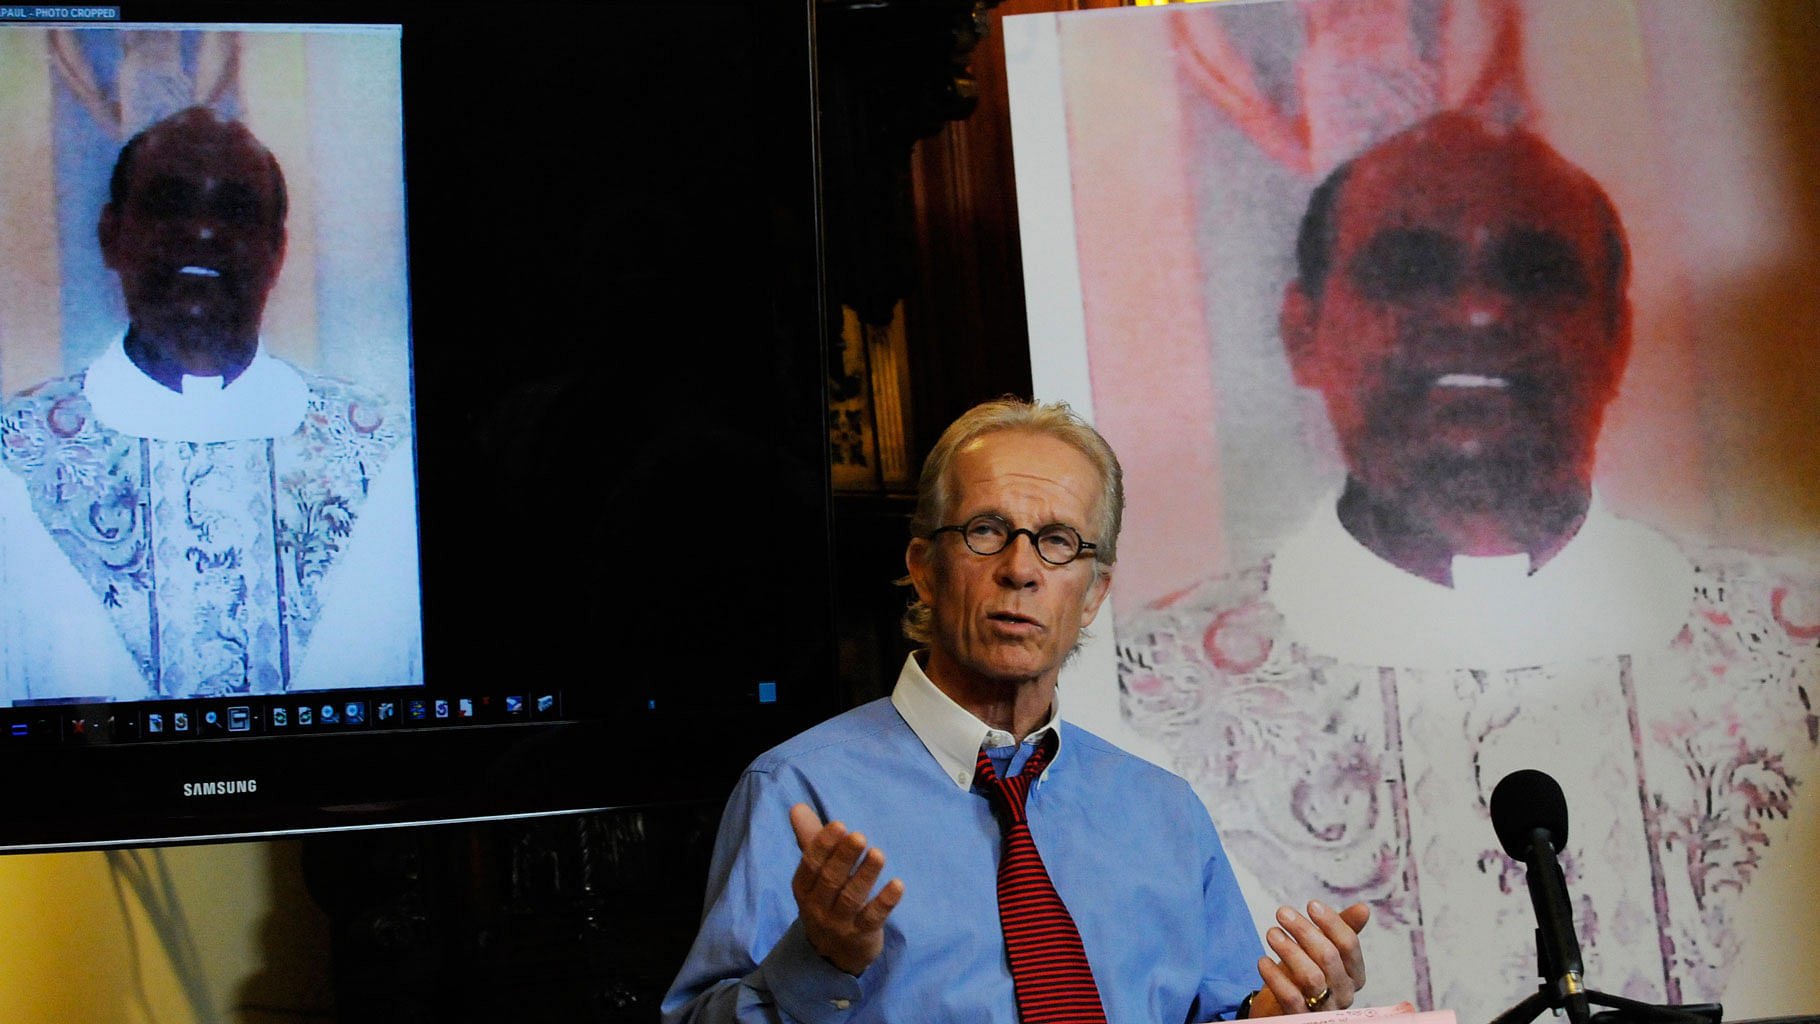 In this Monday, April 5, 2010 file photo, attorney Jeff Anderson stands between photos of The Rev. Joseph Palanivel Jeyapaul during a news conference in St. Paul, Minn. (Photo: AP)